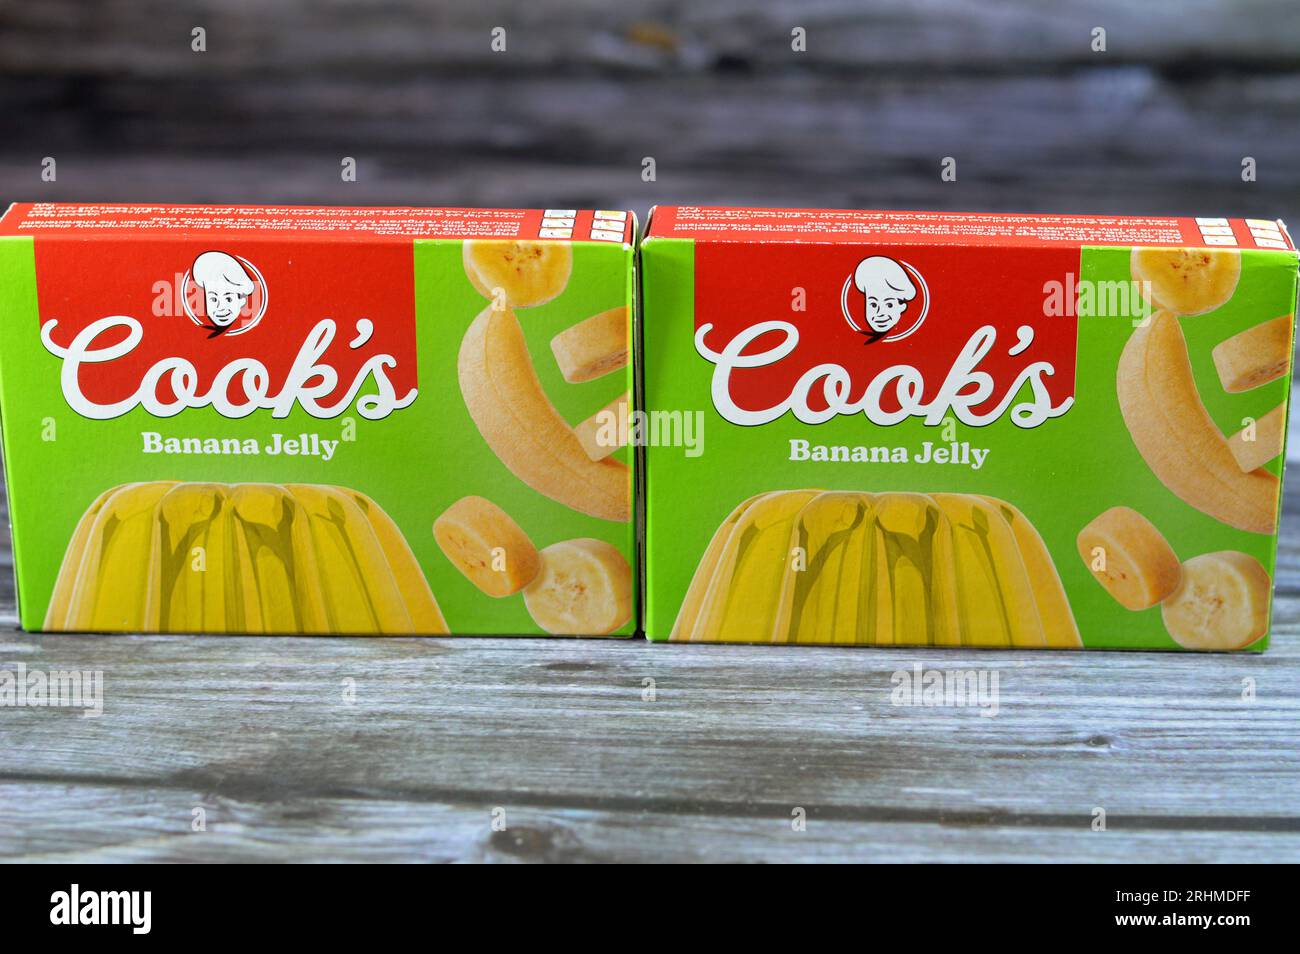 Cairo, Egypt, July 25 2023: Cook's Jelly banana pack, sweet red jelly pudding banana flavored, selective focus of chilled red bananas jelly dessert, G Stock Photo